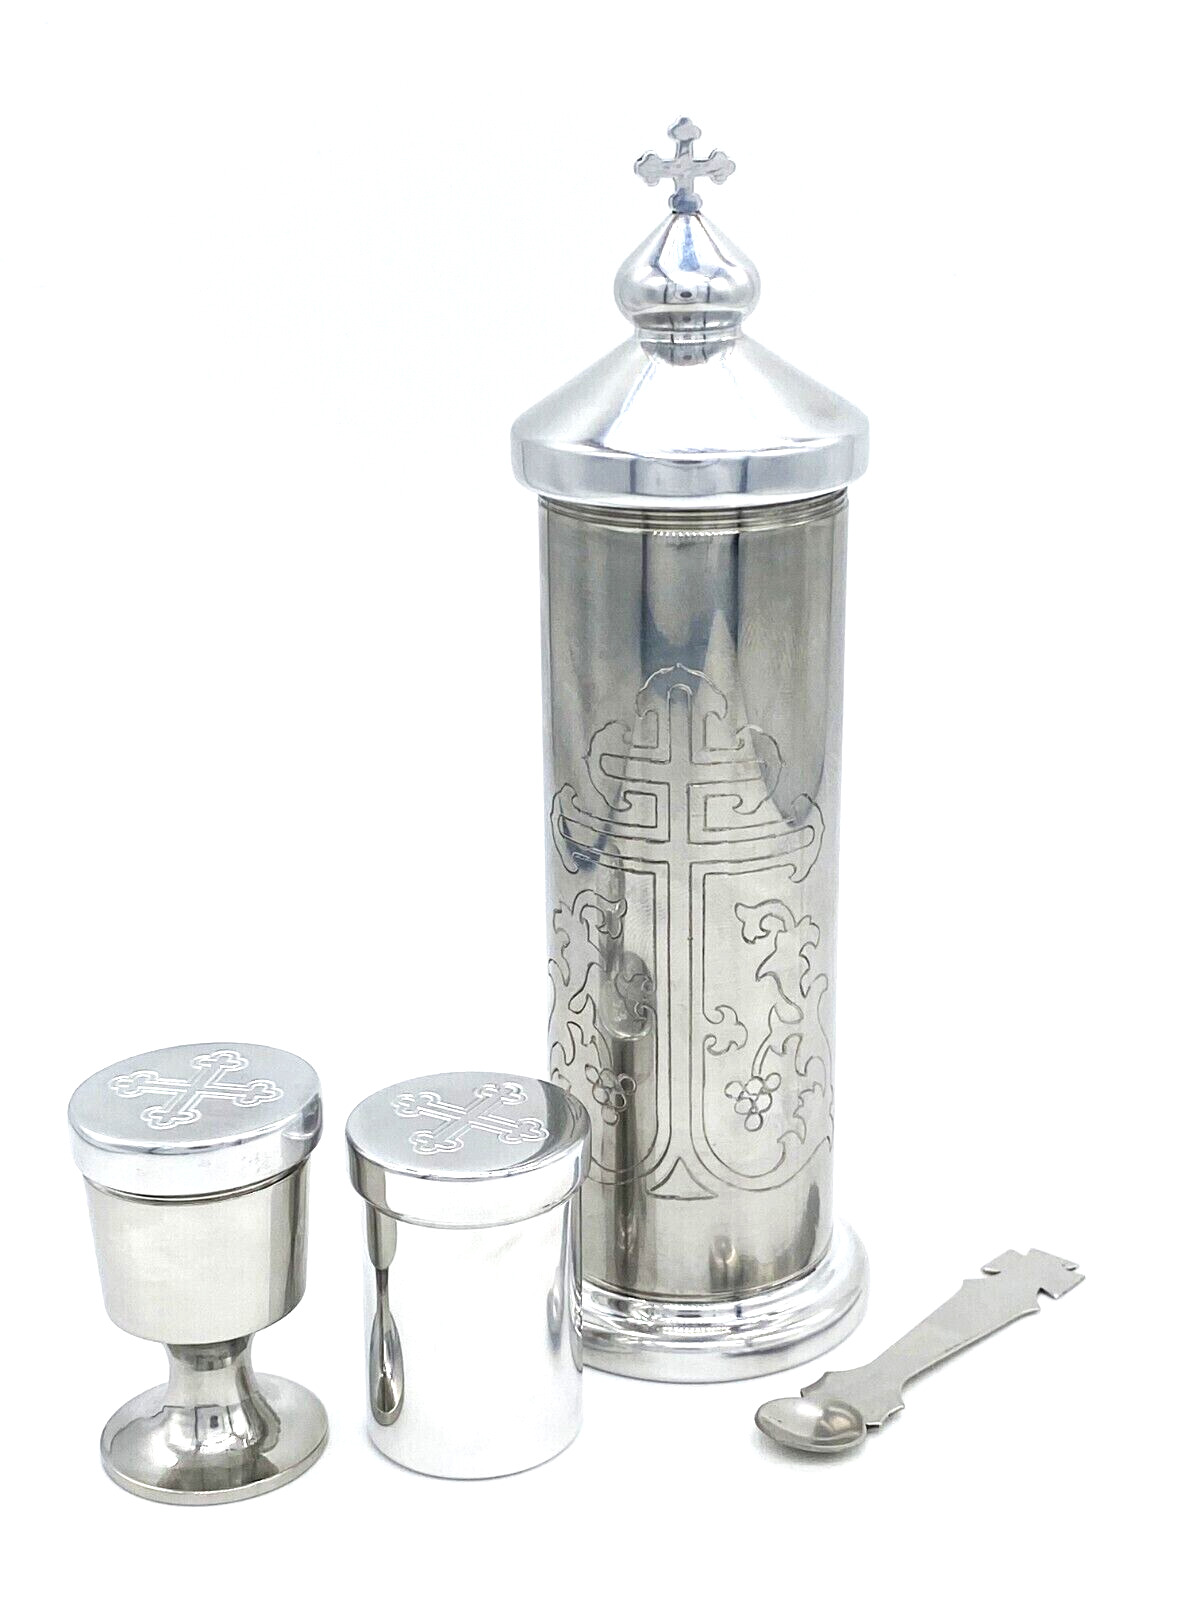 Tabernacle Engraved Metal Stainless Steel with 2 Potyr and 1 Spoon